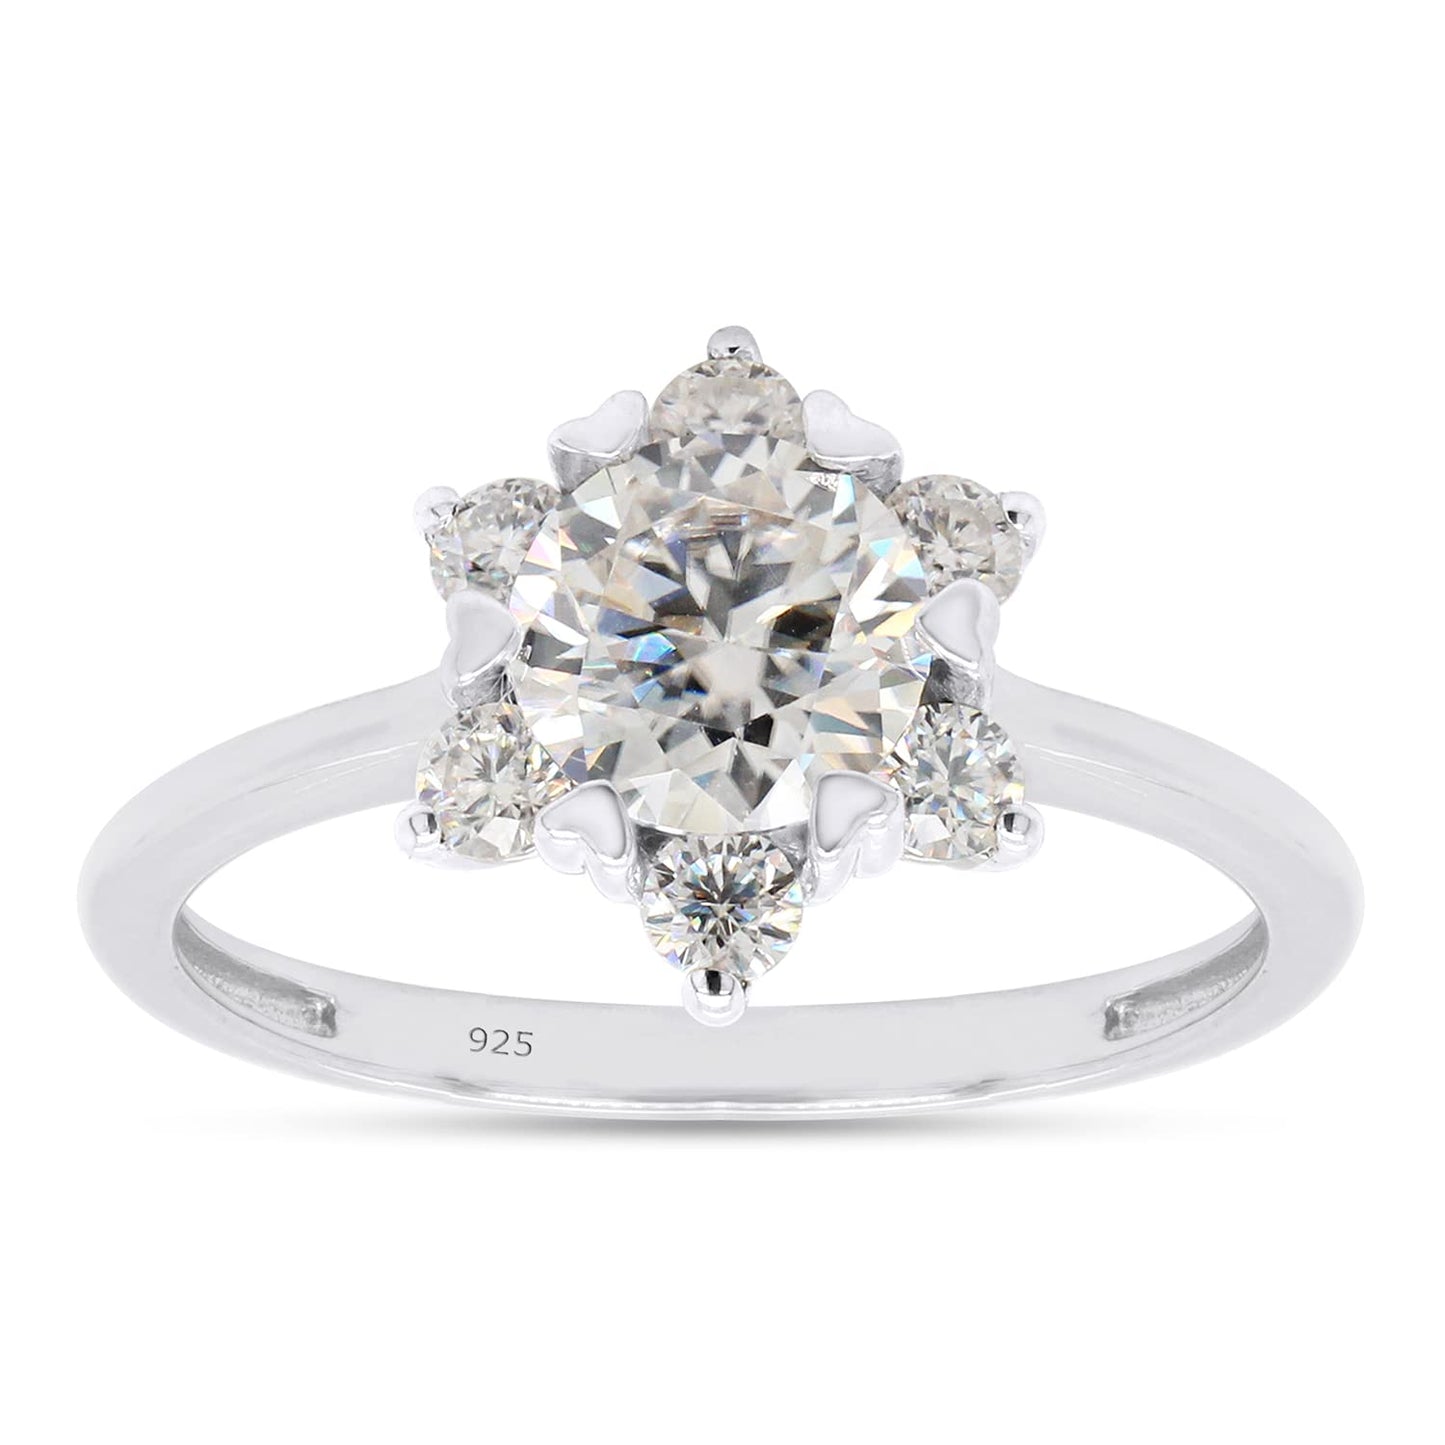 Load image into Gallery viewer, 1 1/3 ct. t.w Center 6.5MM Round Cut Lab Created Moissanite Diamond Flower Engagement Rings for Women in 925 Sterling Silver (1.30 Cttw)
